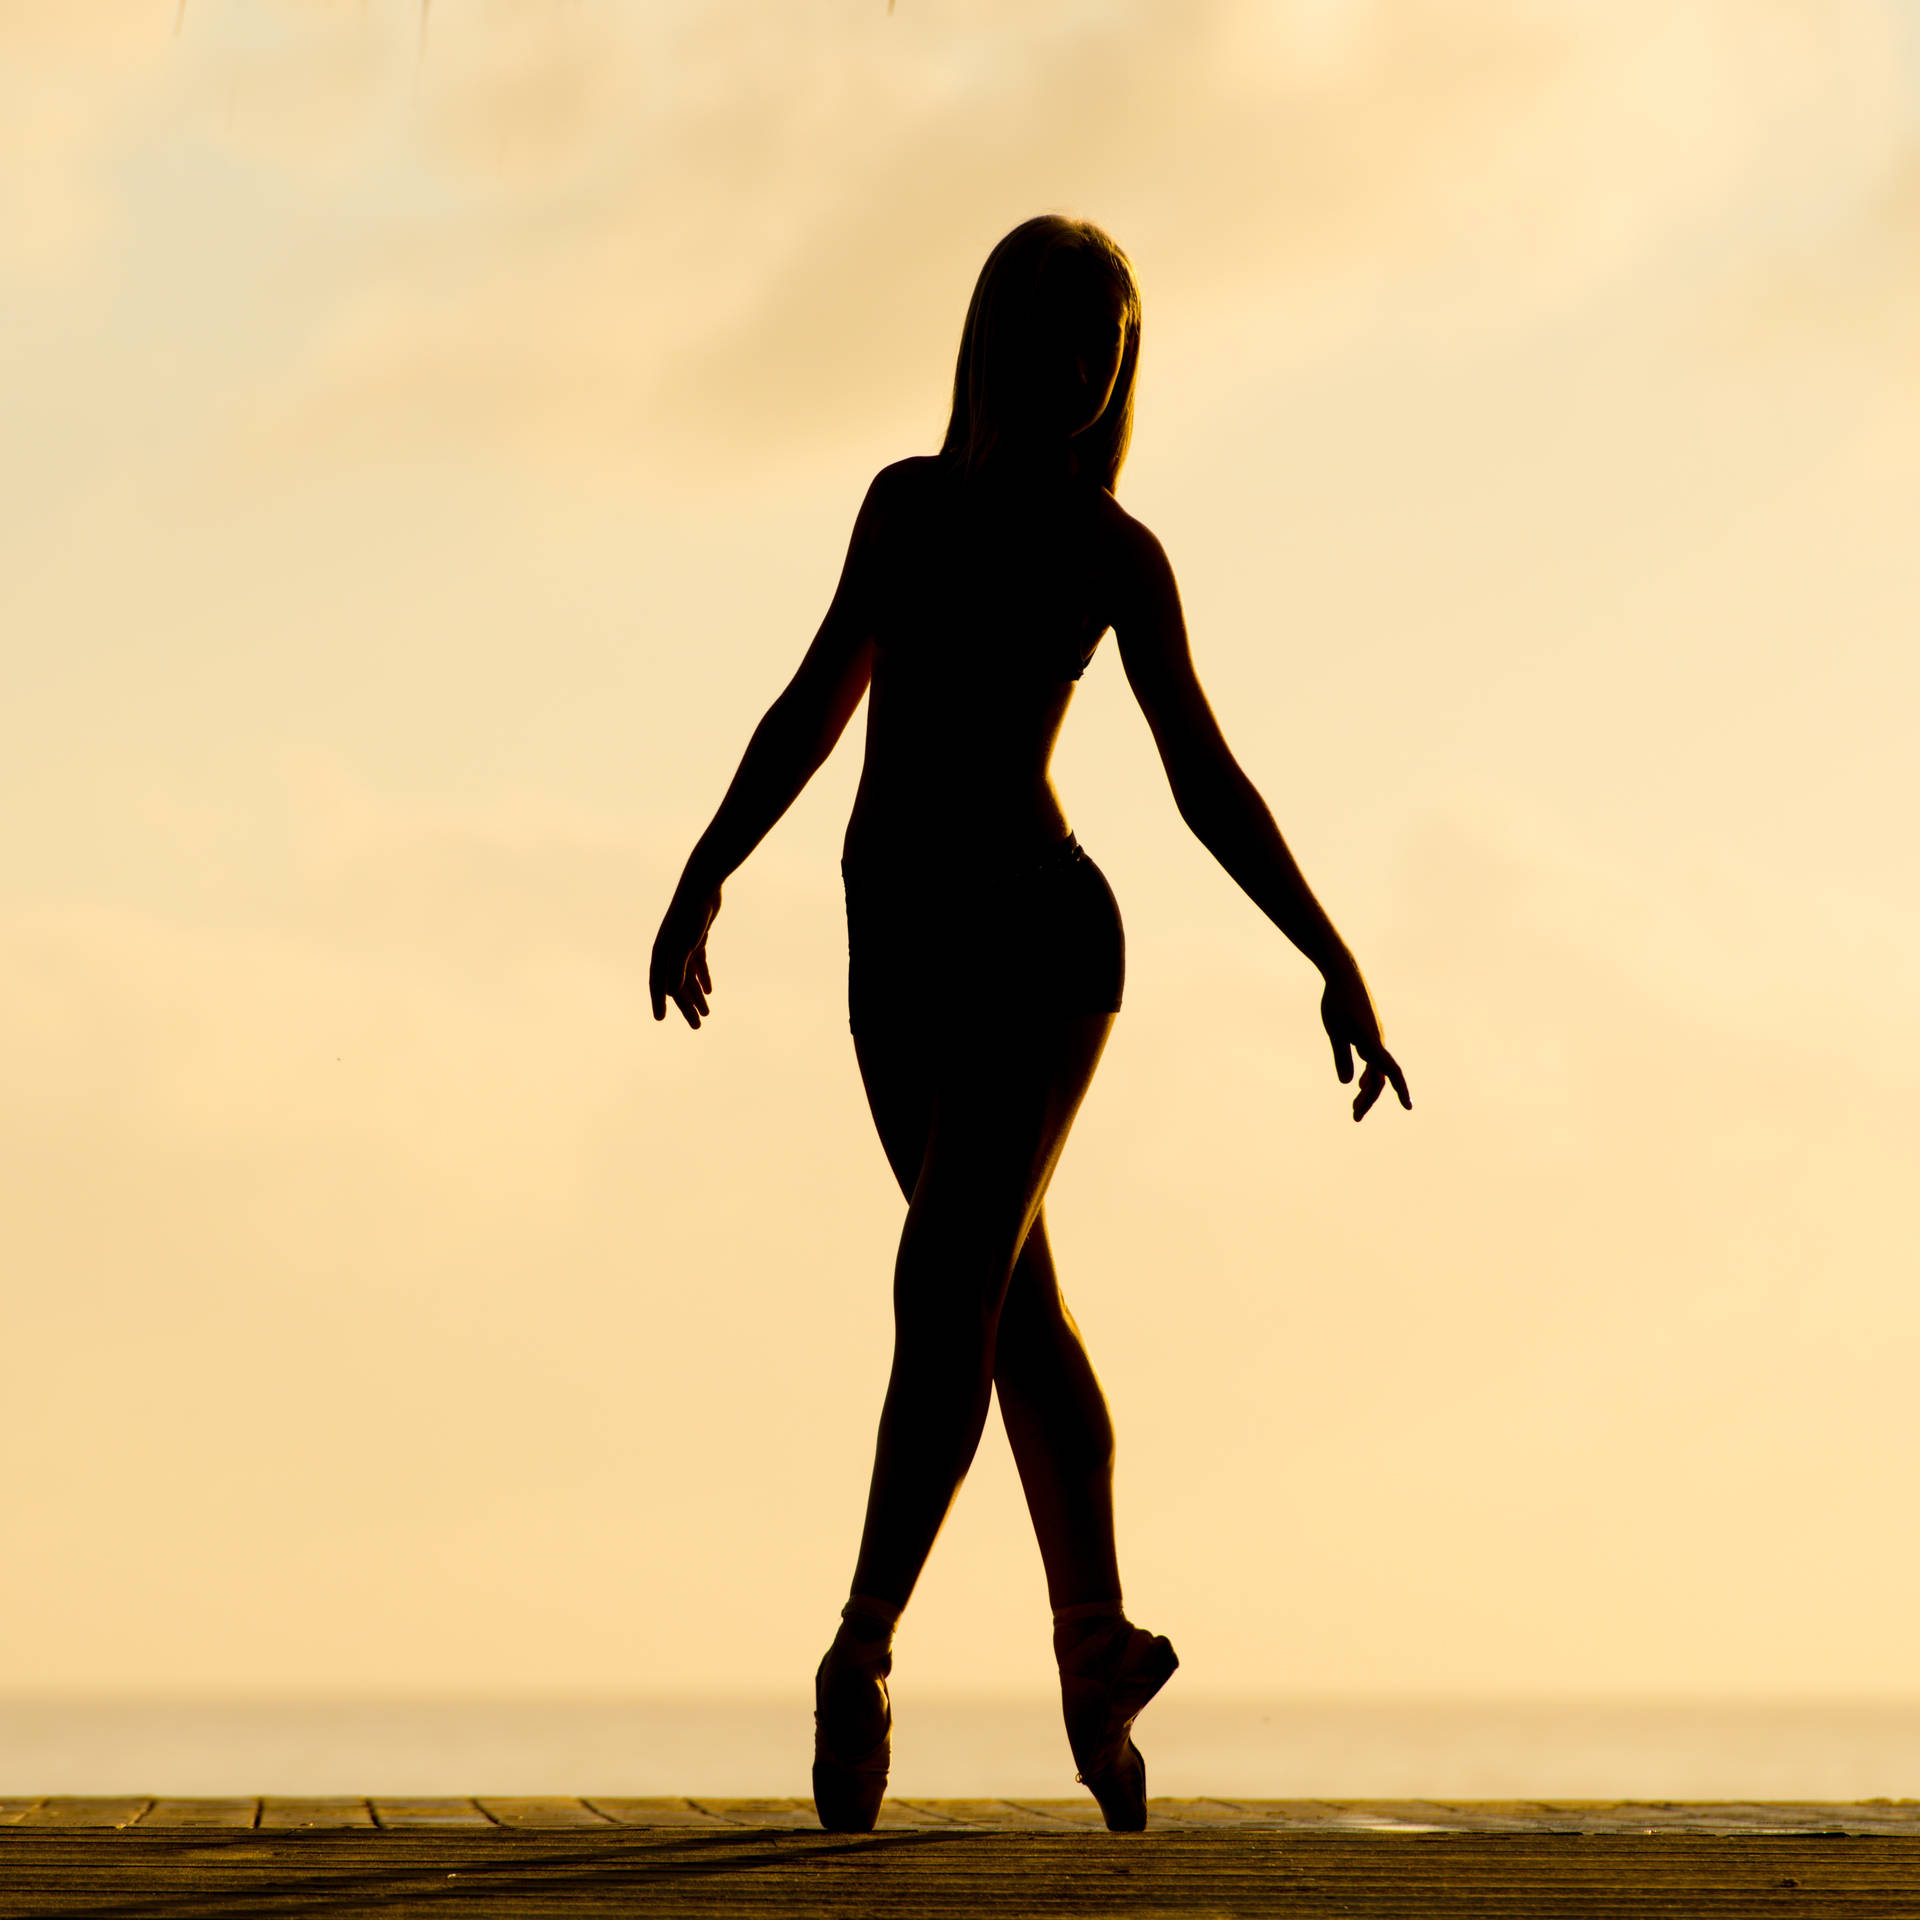 Elegance in Motion: Silhouette of a Ballerina in Dance Pose Wallpaper